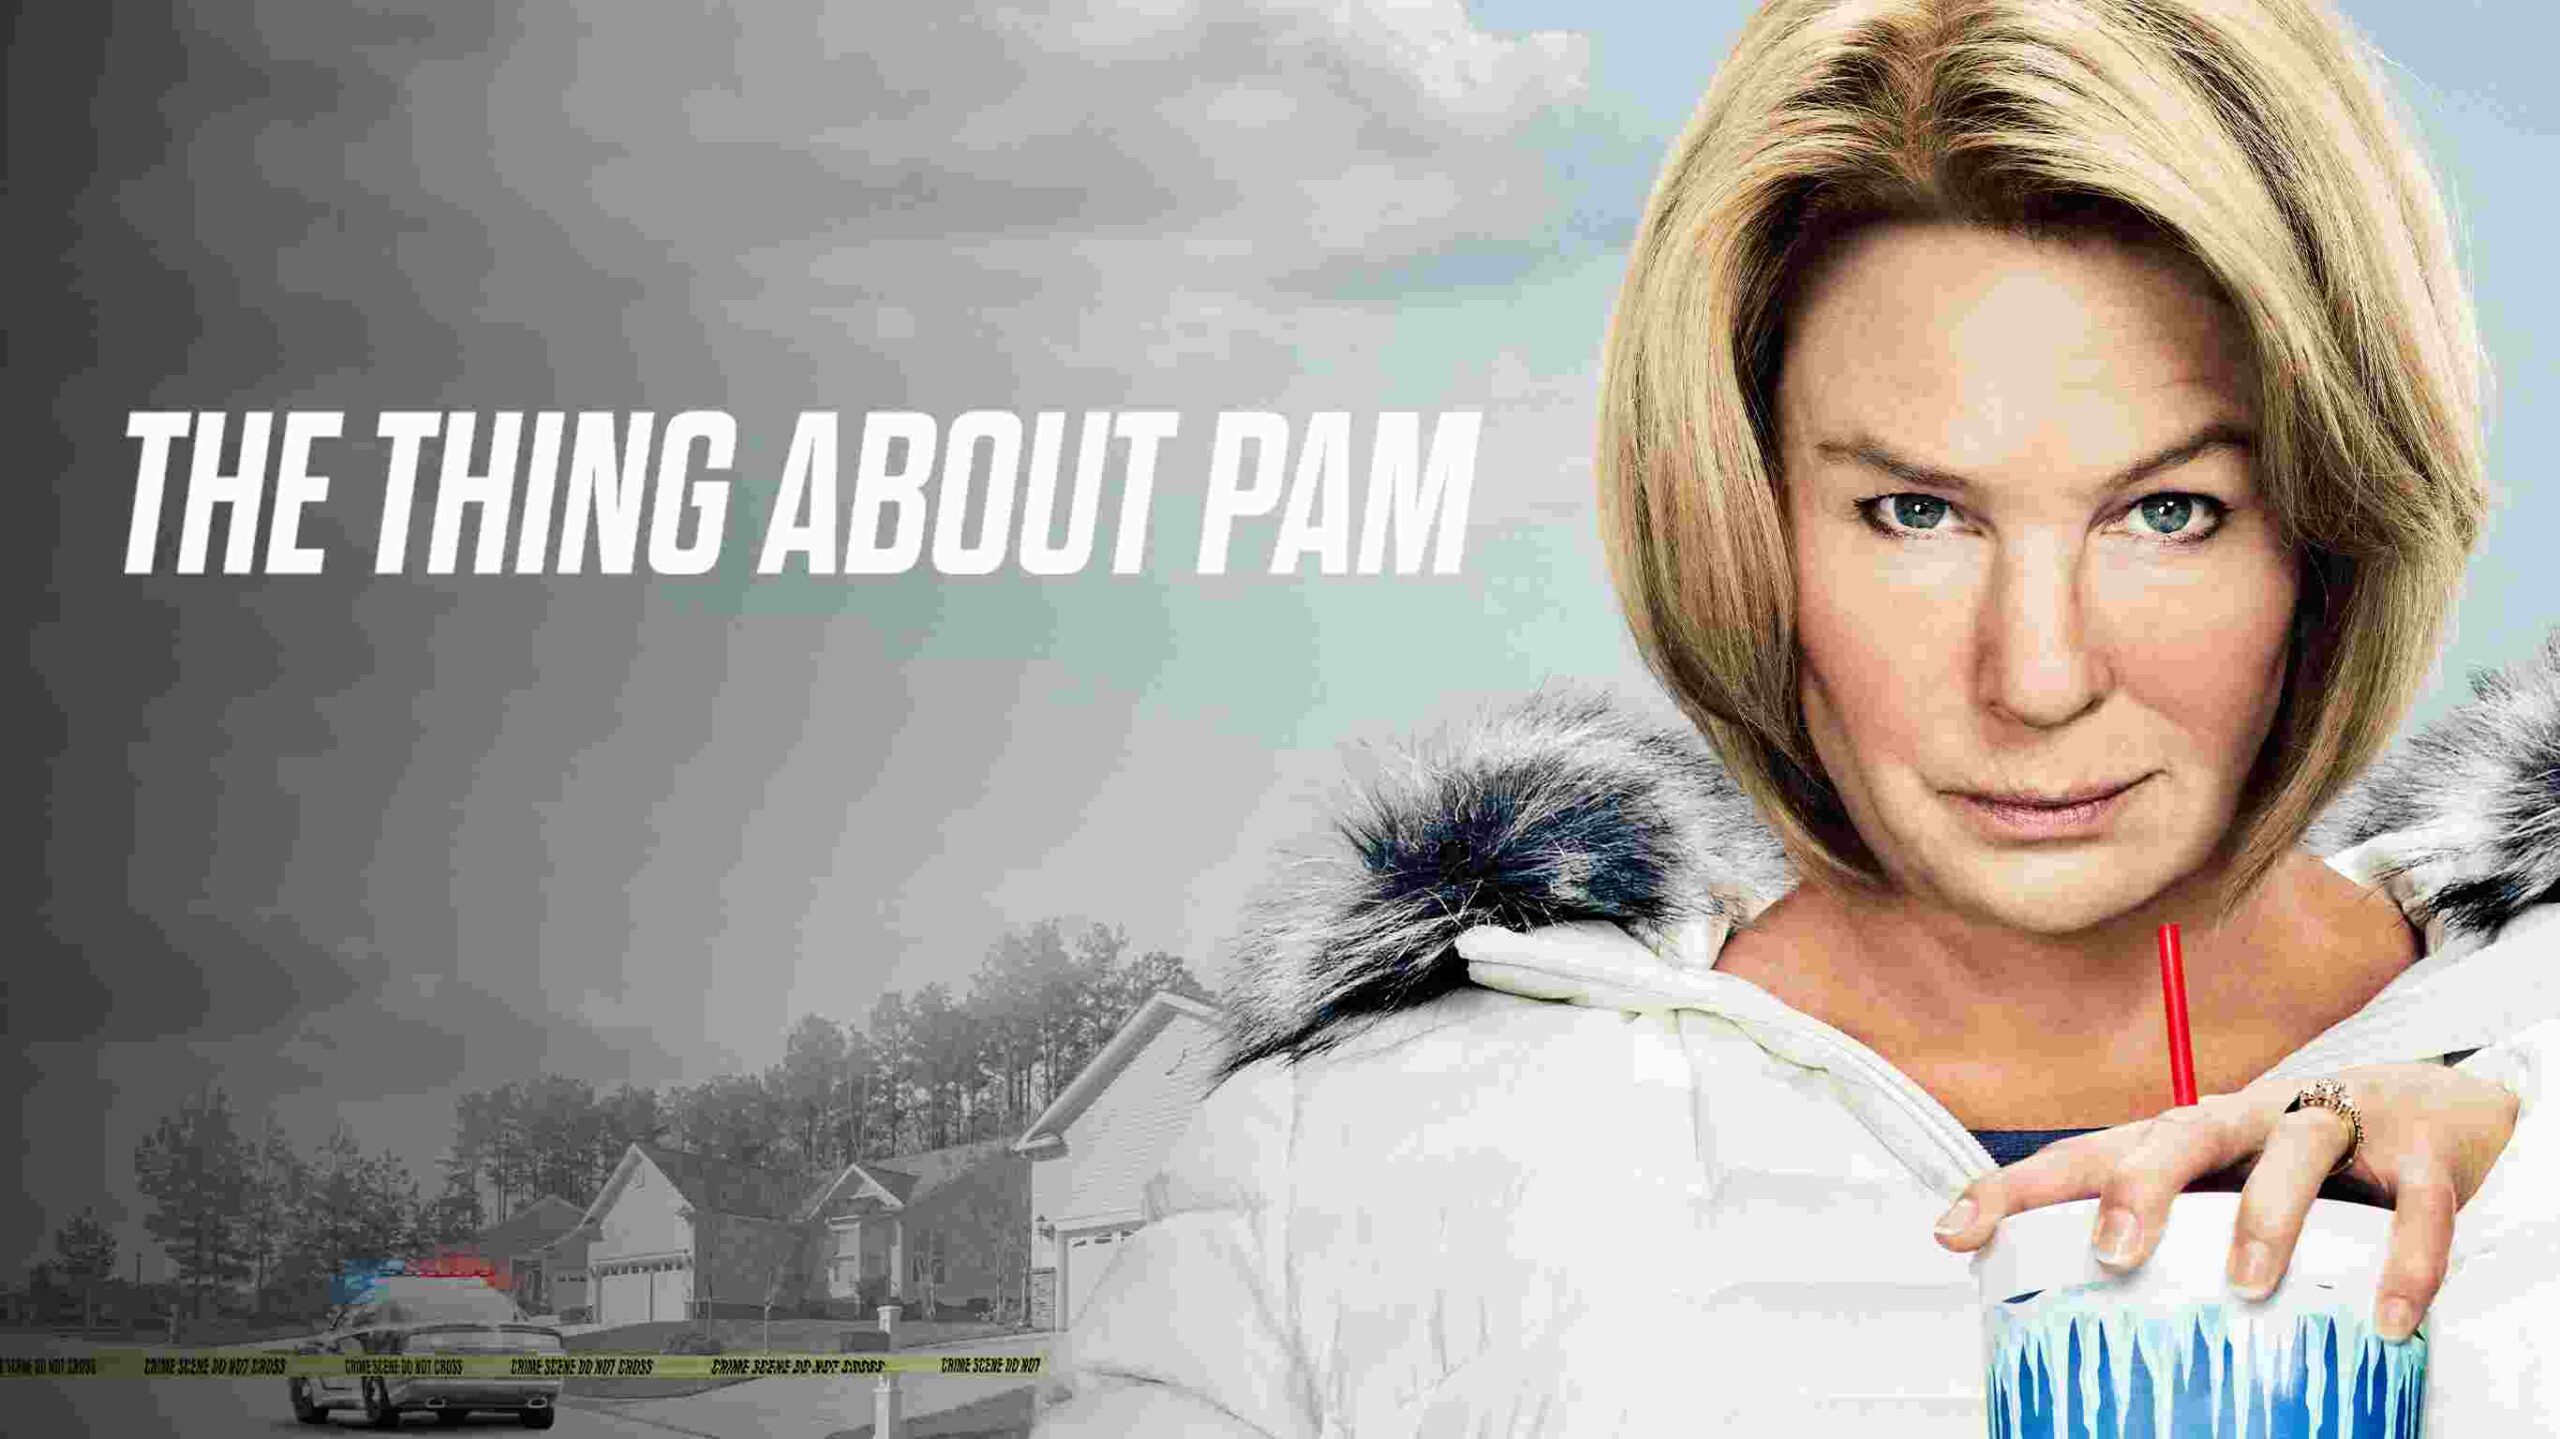 The thing about Pam